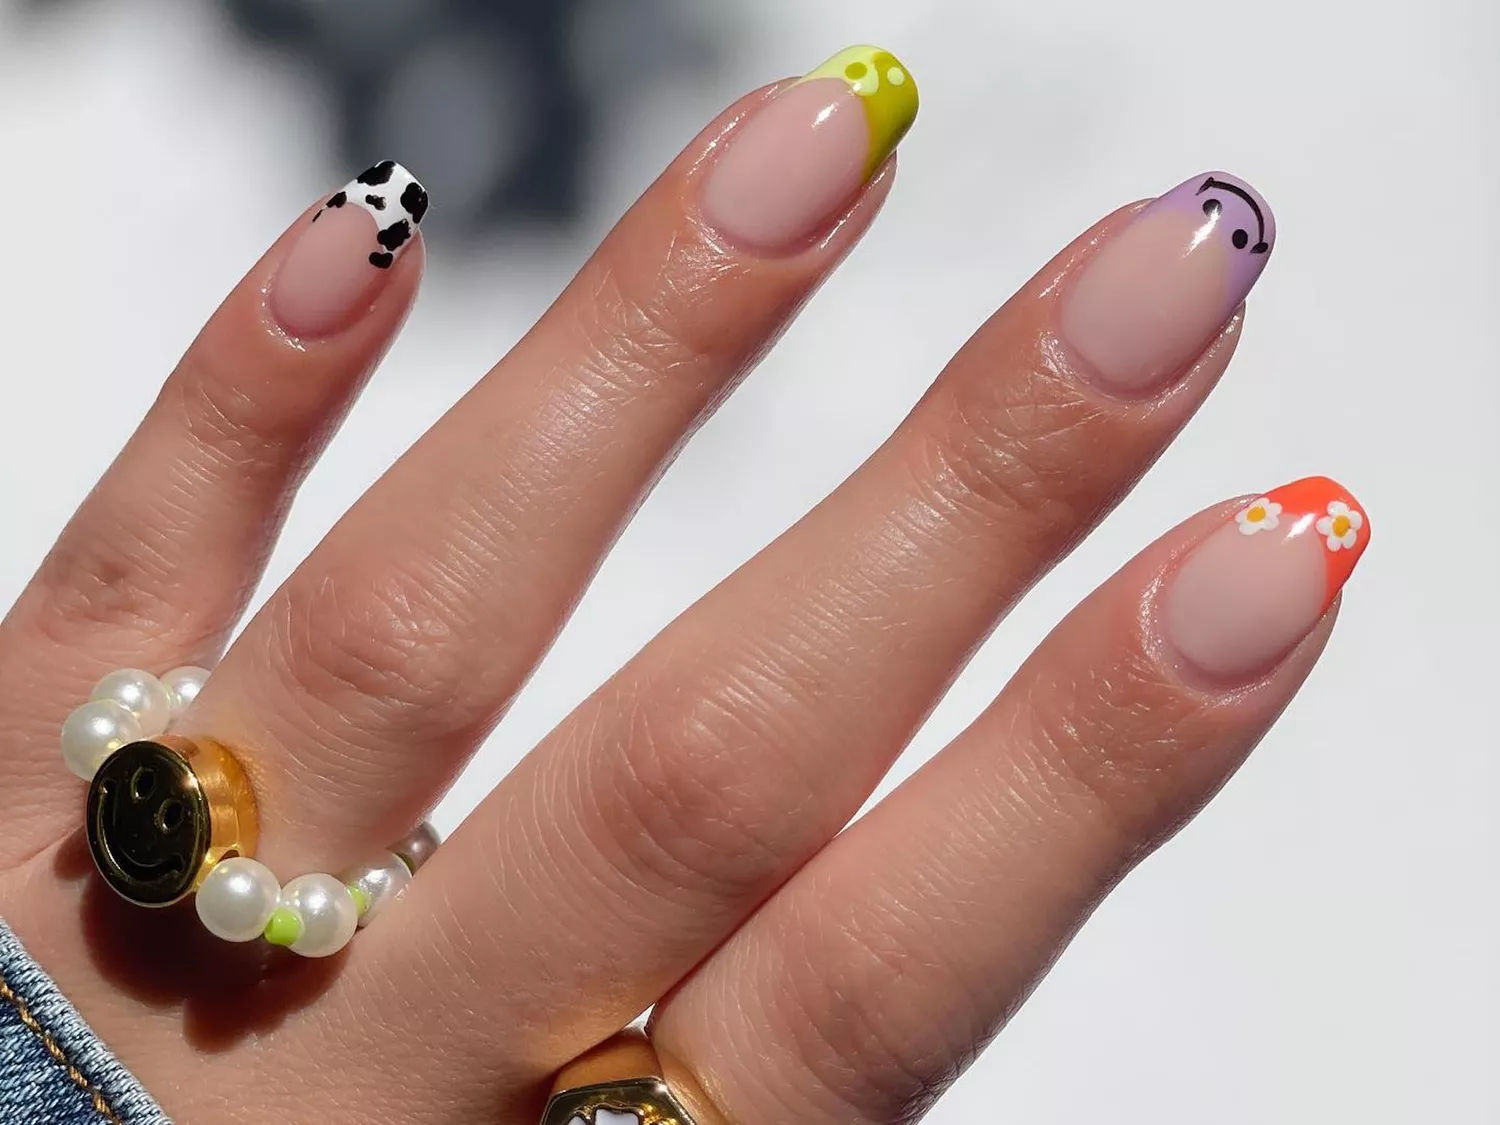 Mismatched French tip manicure with smiley, daisy, yin/yang, and cow print designs